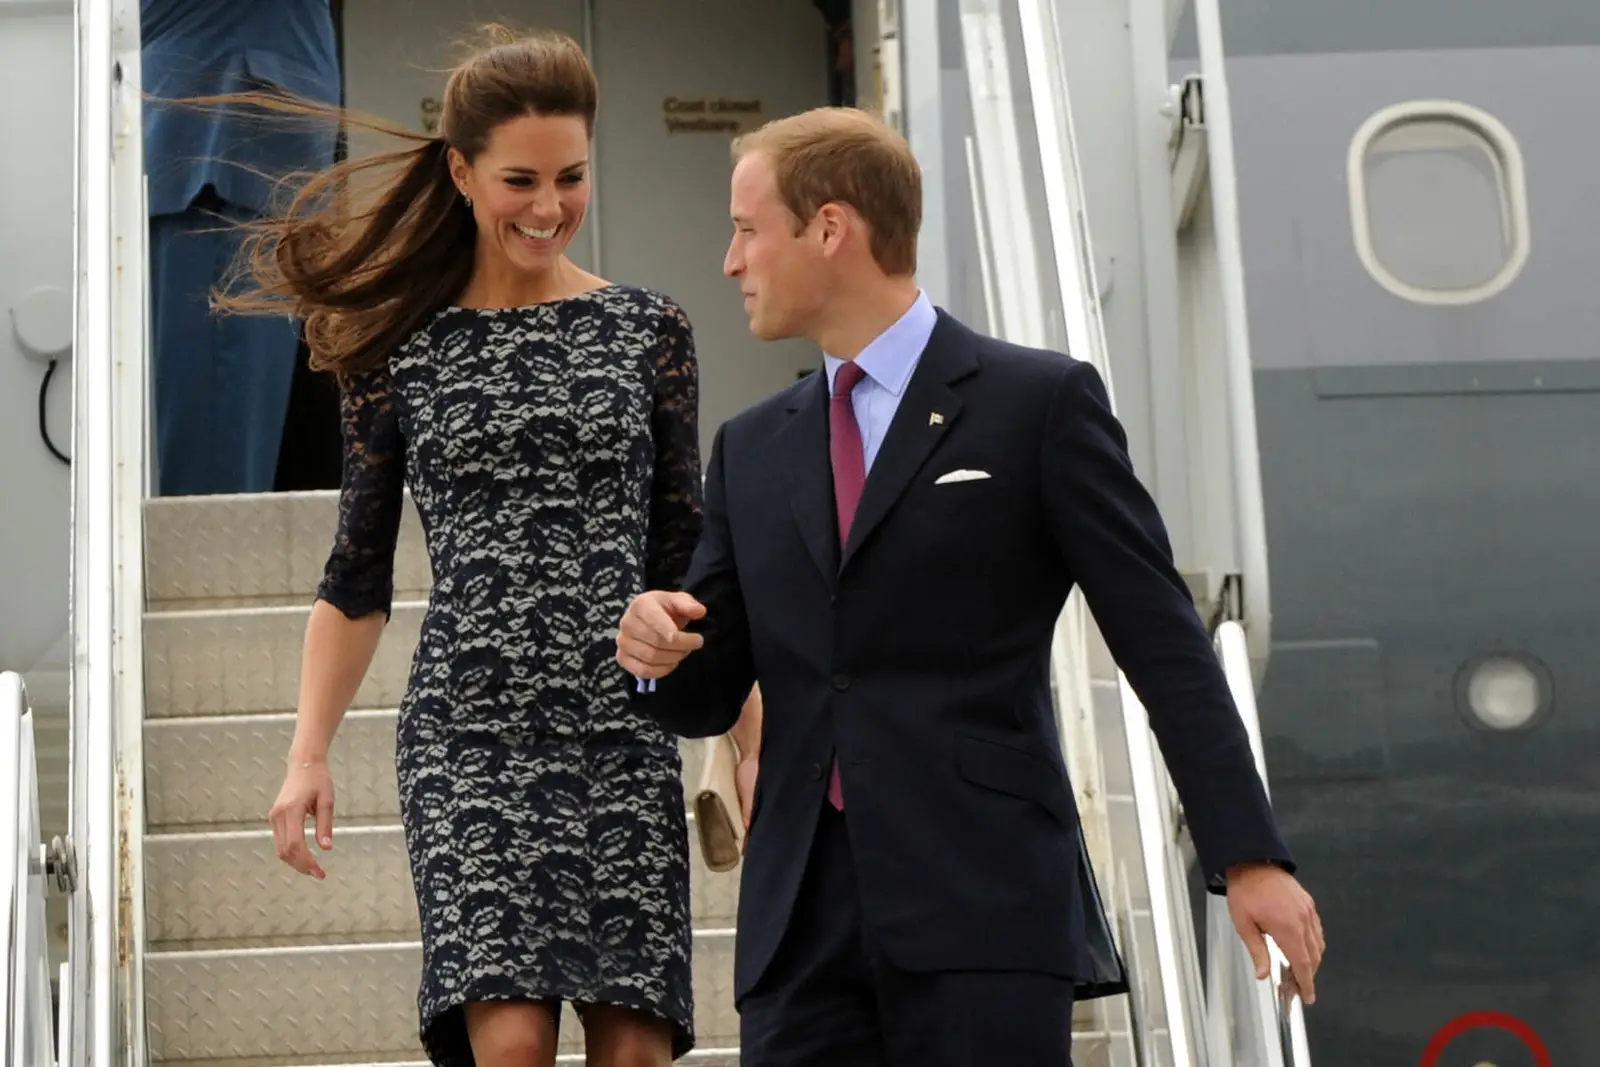 The Duke and Duchess of Cambridge arrived in Canada for Royal tour in 2011